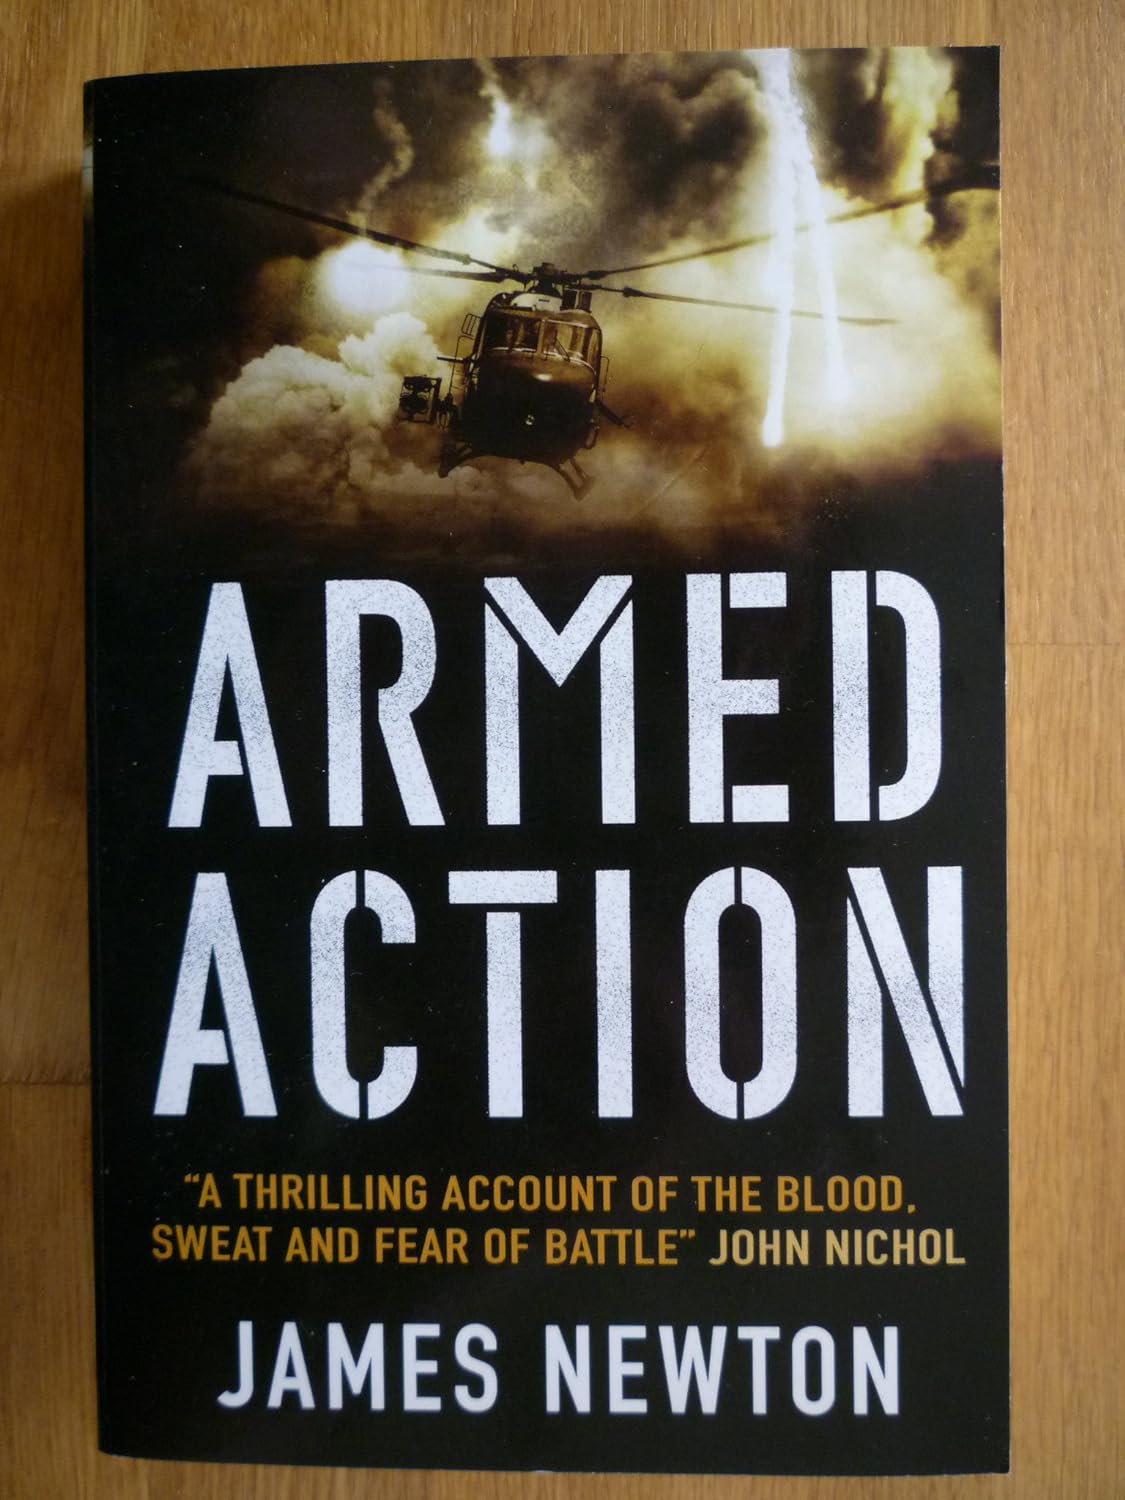 Armed Action